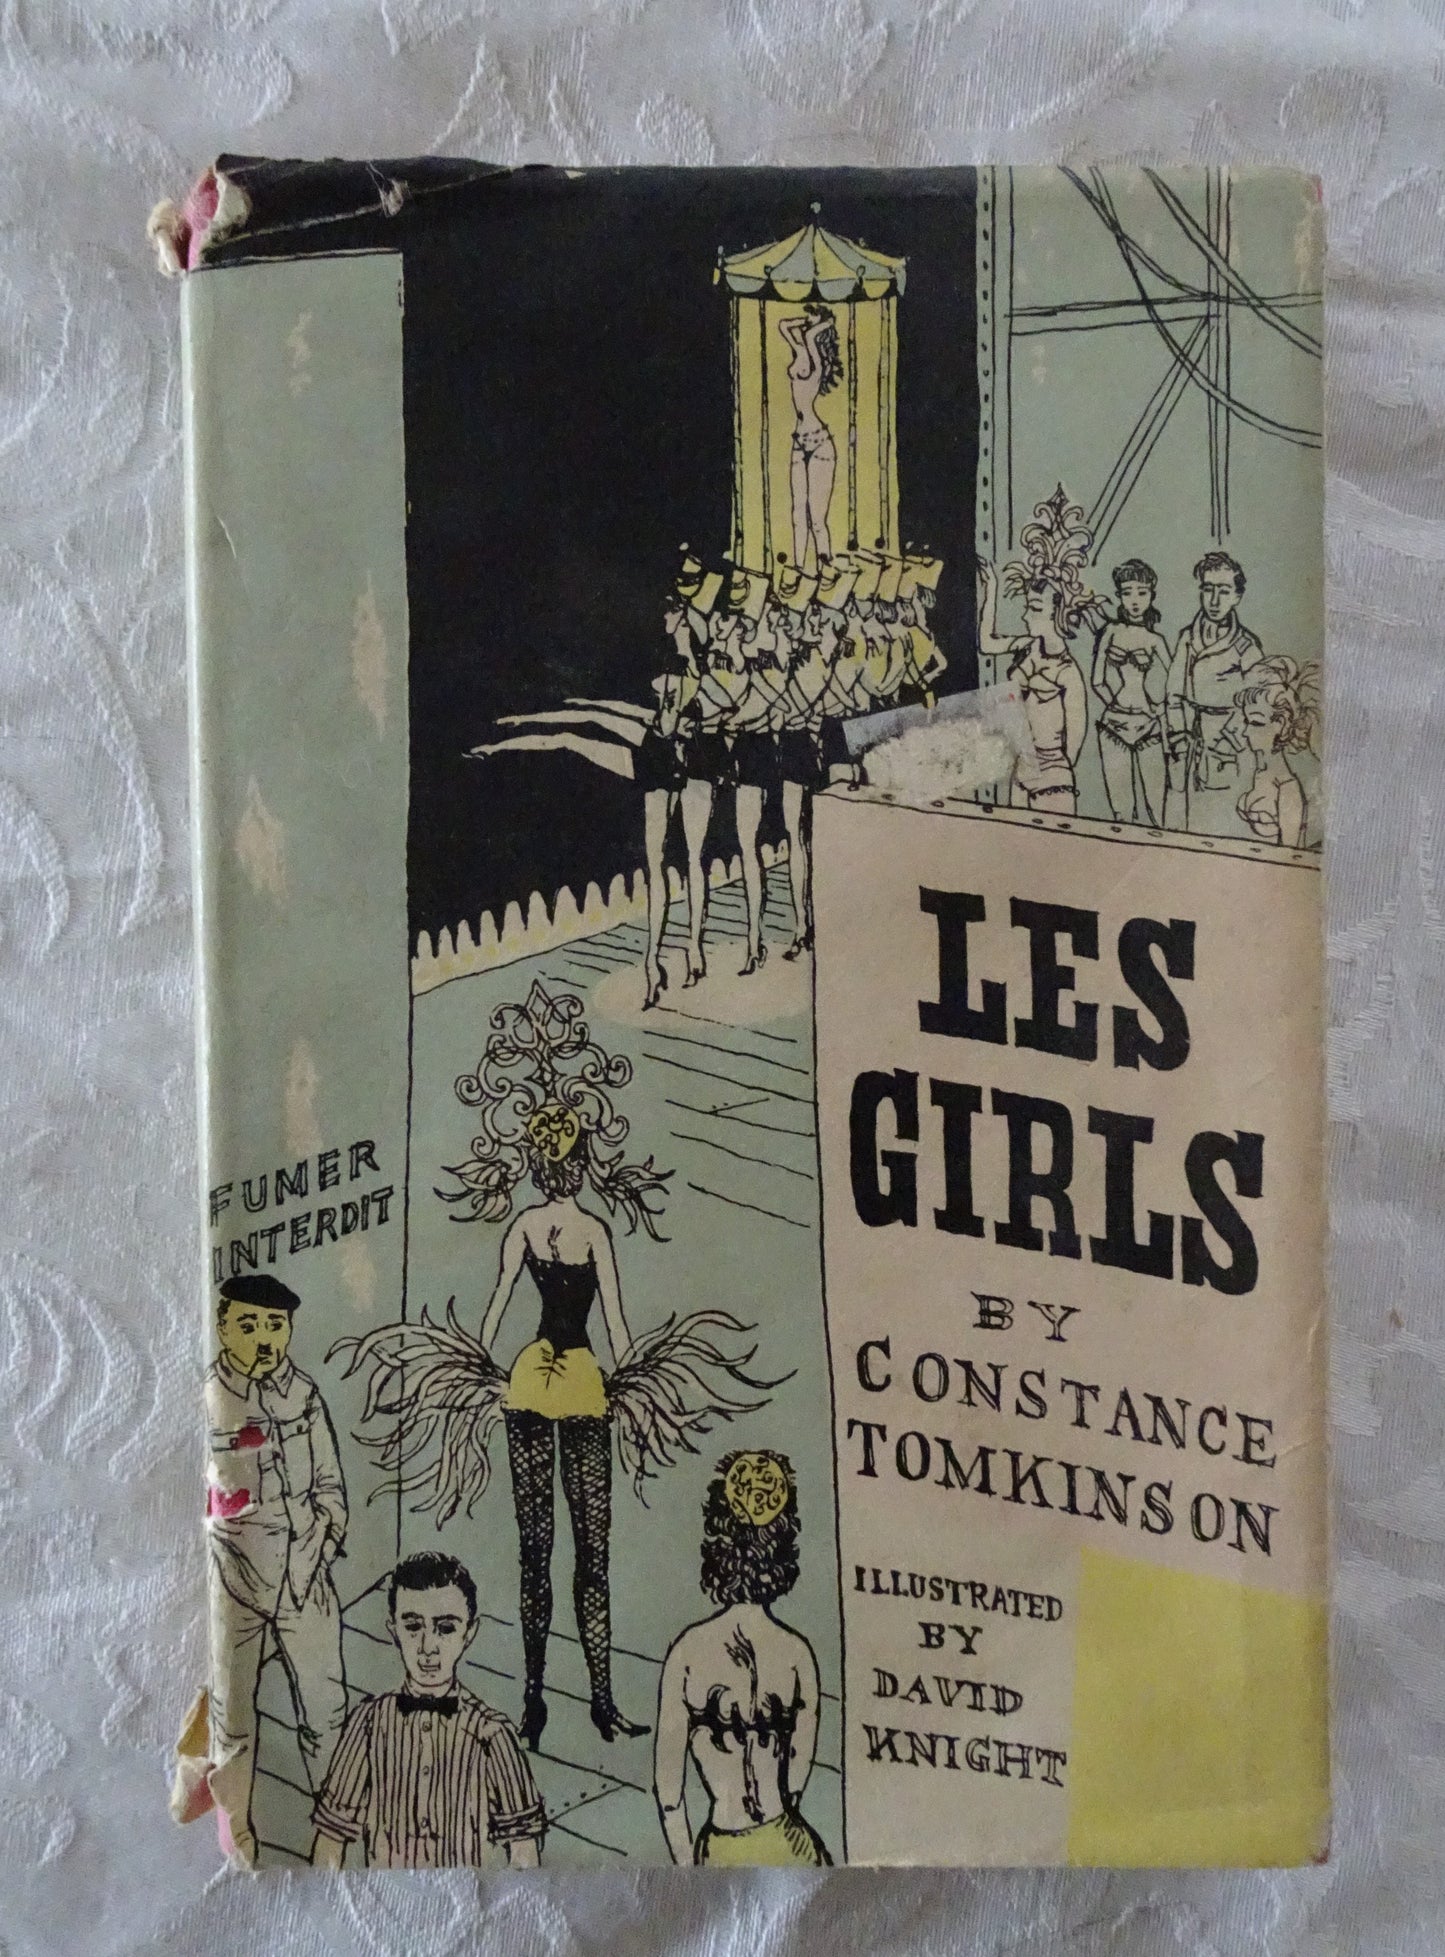 Les Girls by Constance Tomkinson